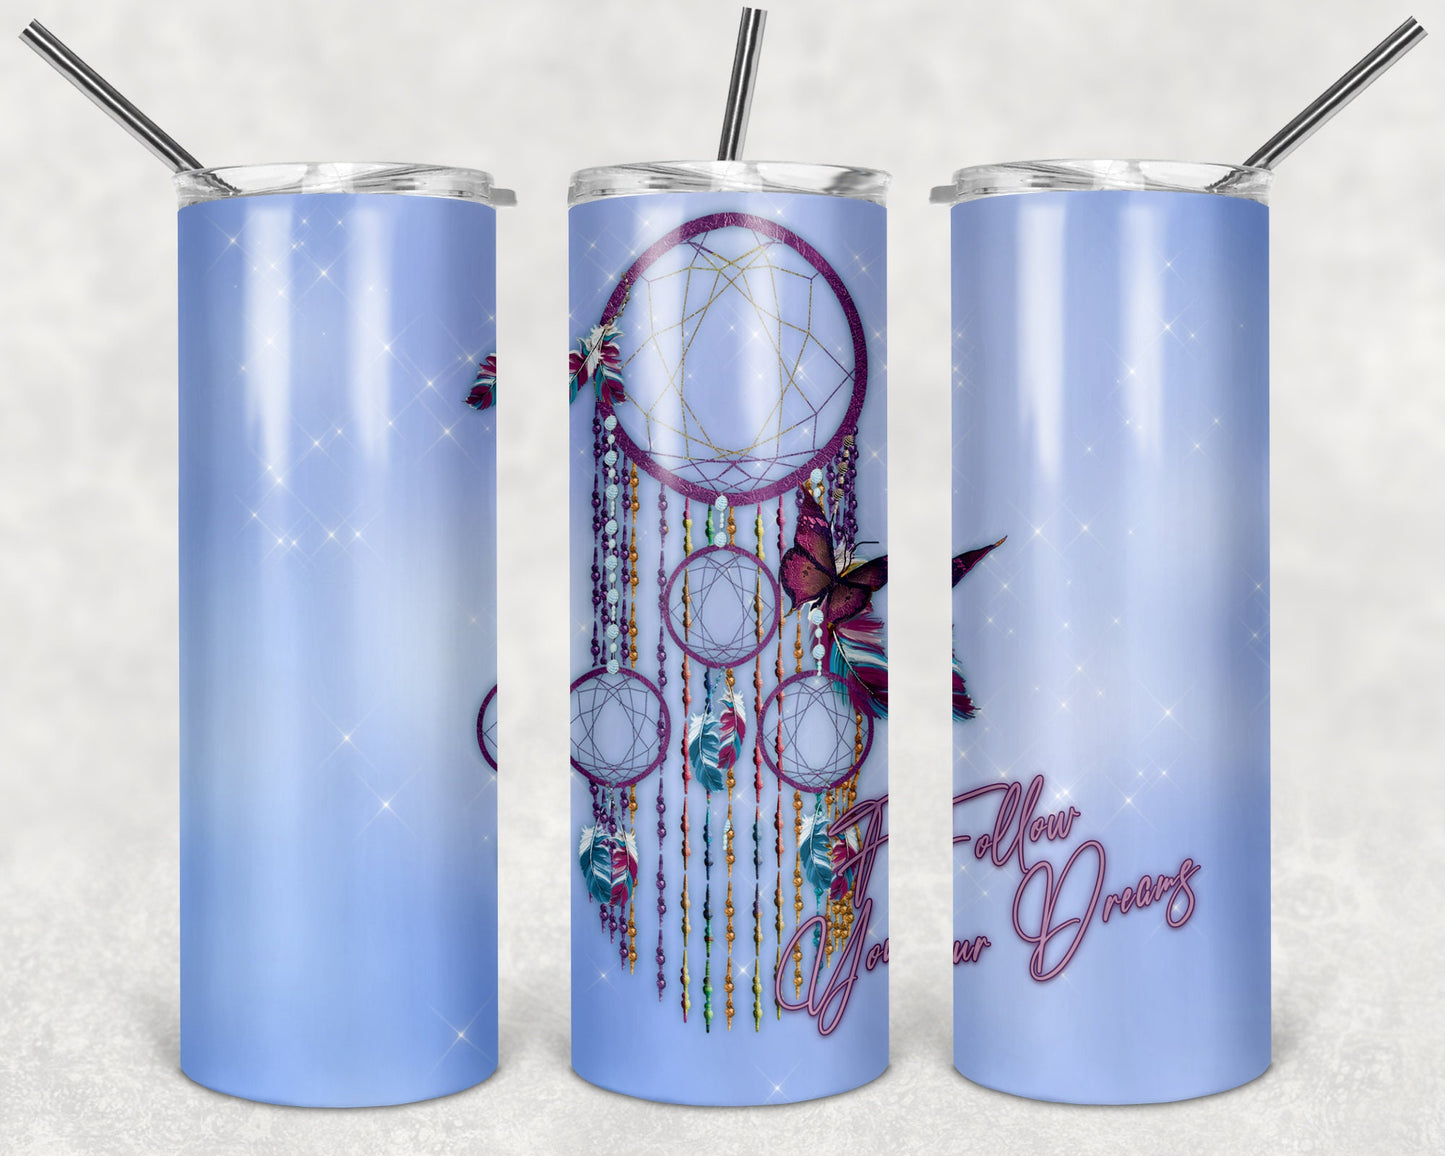 Follow Your Dreams Dreamcatcher and Butterflies Art 20oz Skinny Tumbler - Stainless Steel